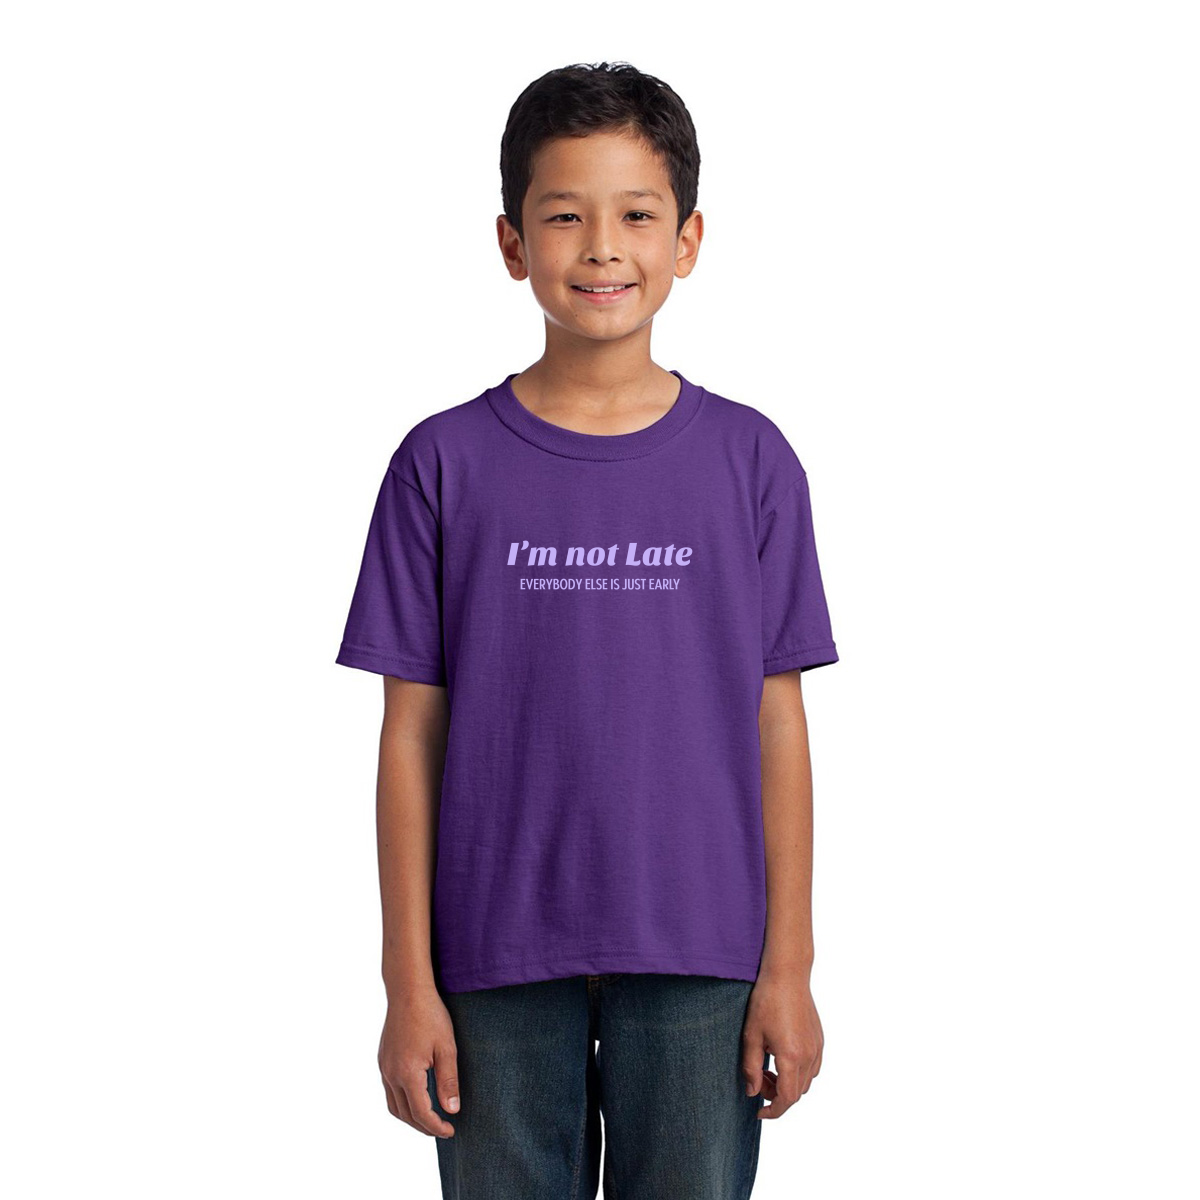 I’m not late everybody else is just early Kids T-shirt | Purple